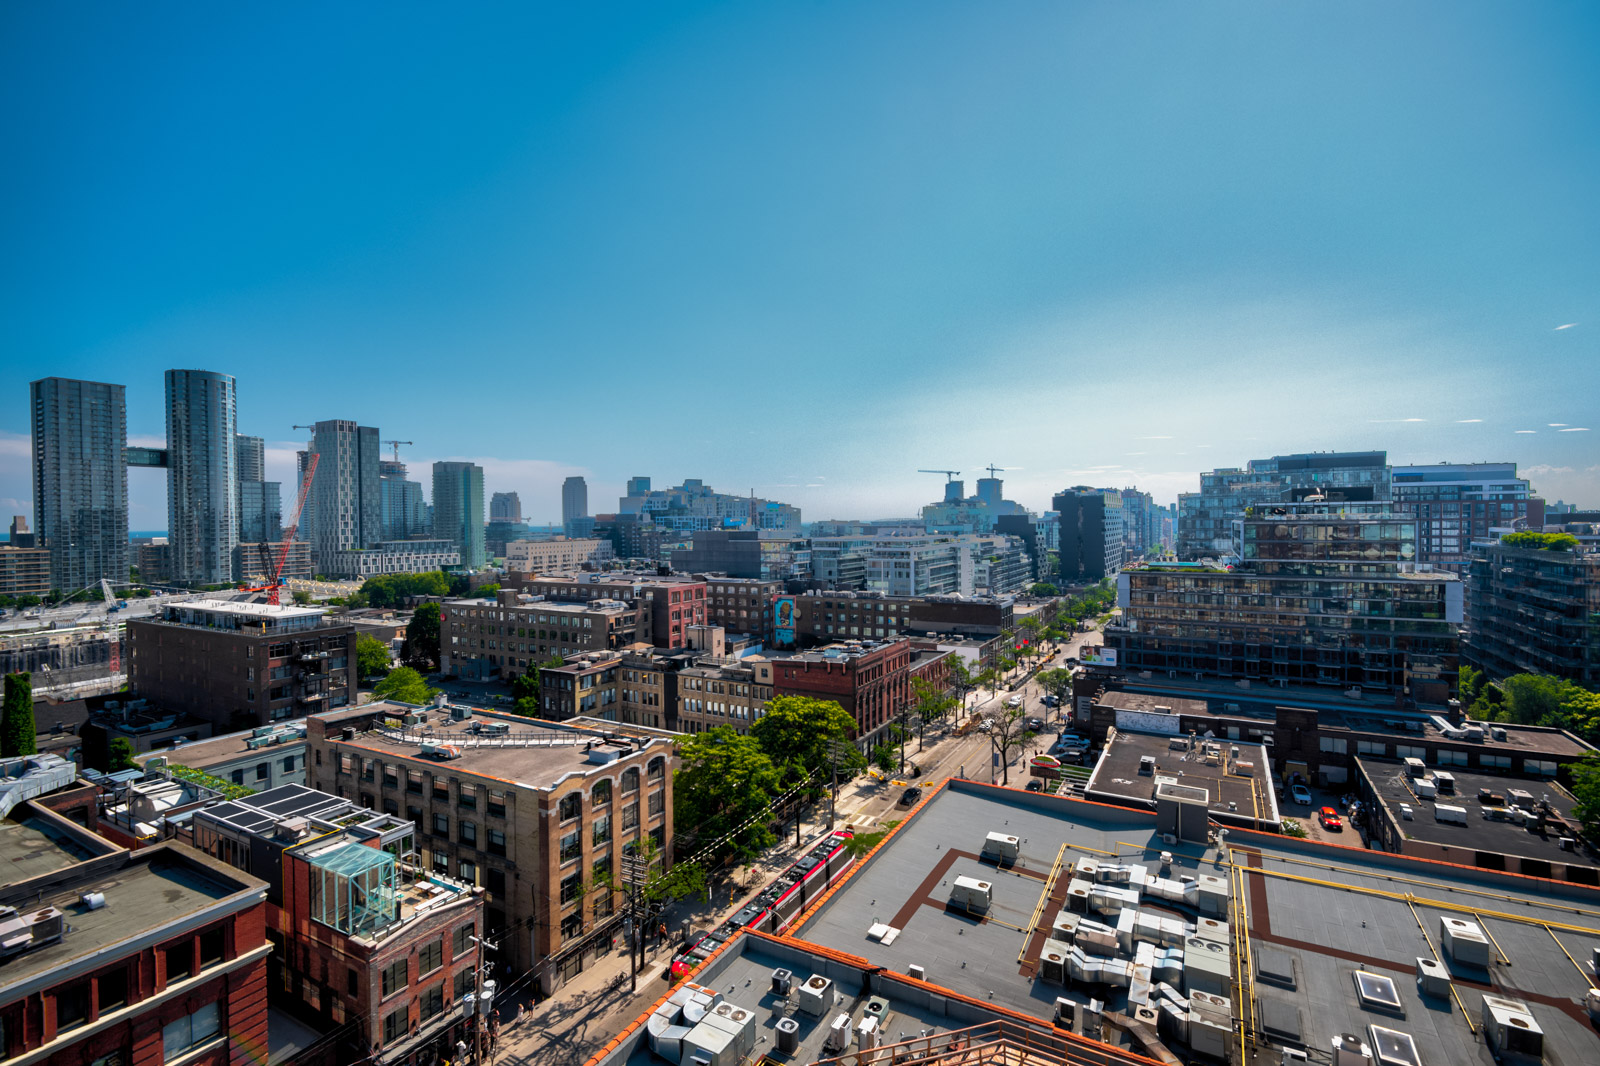 Daytime view of King St W, Toronto from Victory Lofts rooftop.